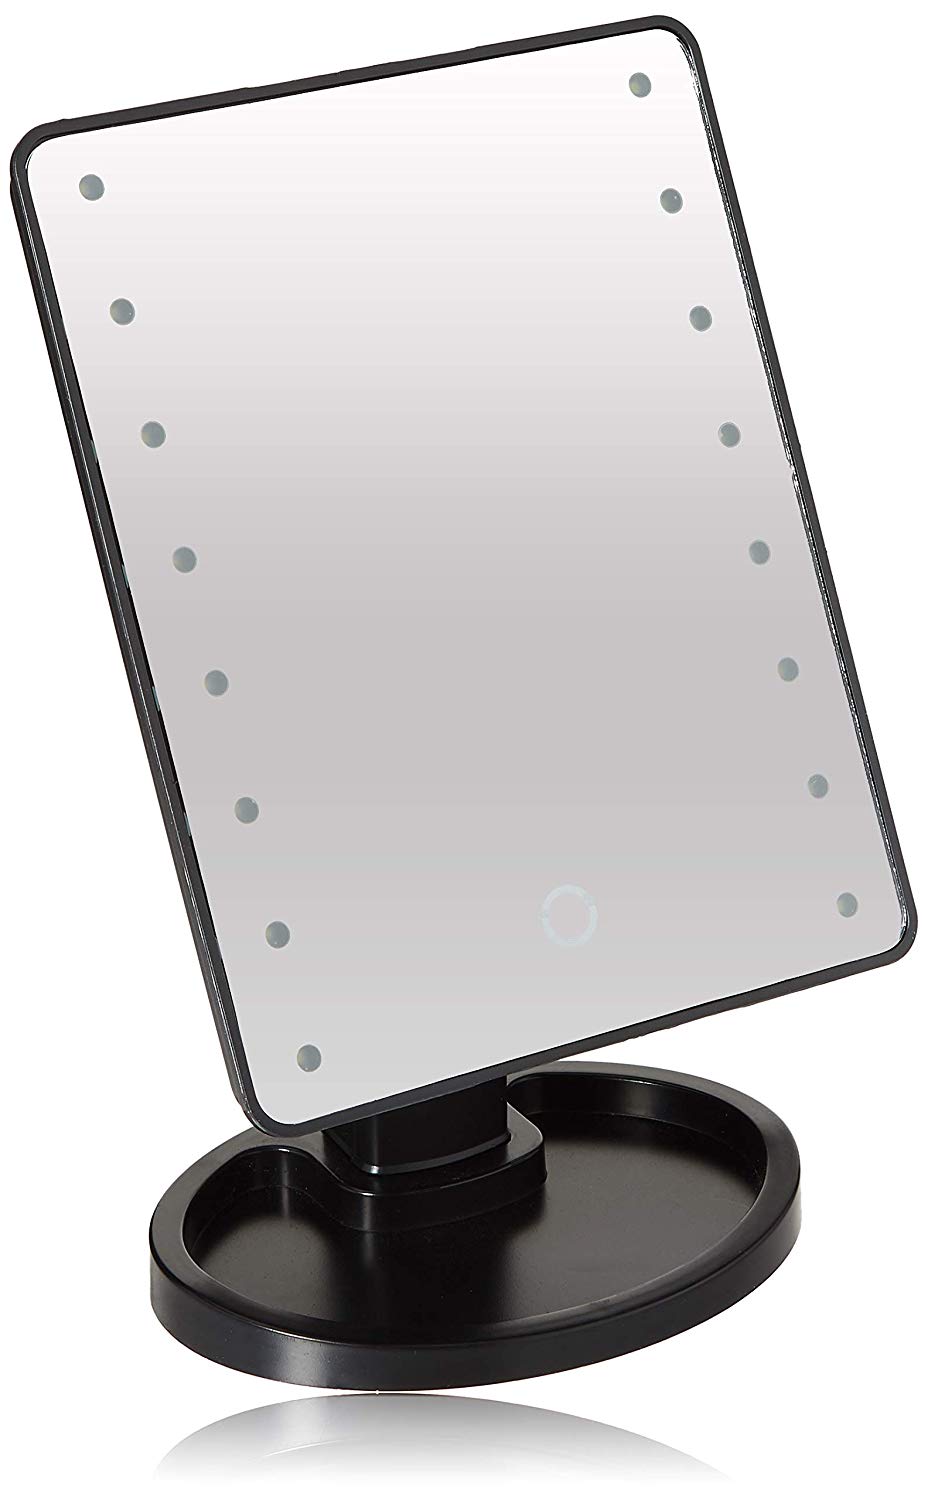 Ideaworks Light Up Mirror Large 16 LED Lights Rotating Mirror Magnifier Tray